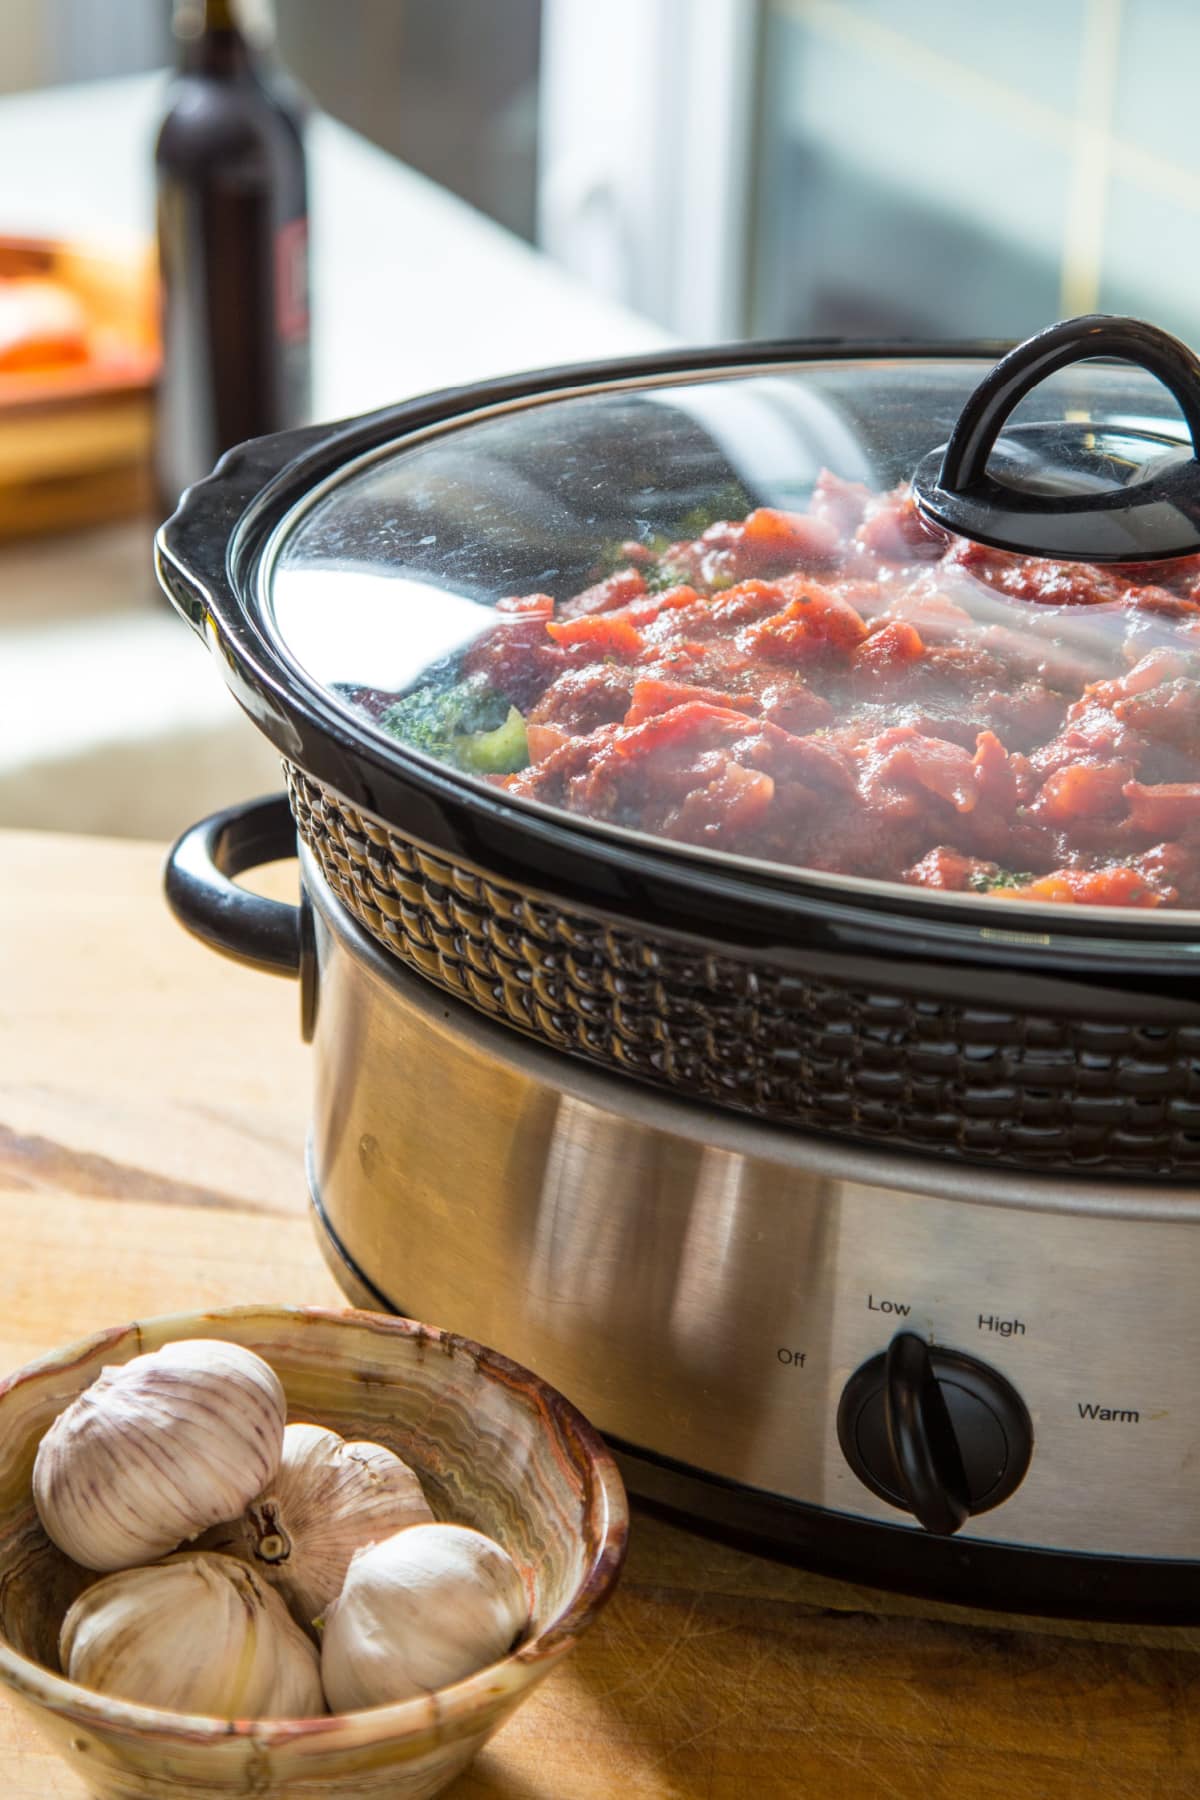 Cooking Pork on a Slow Cooker